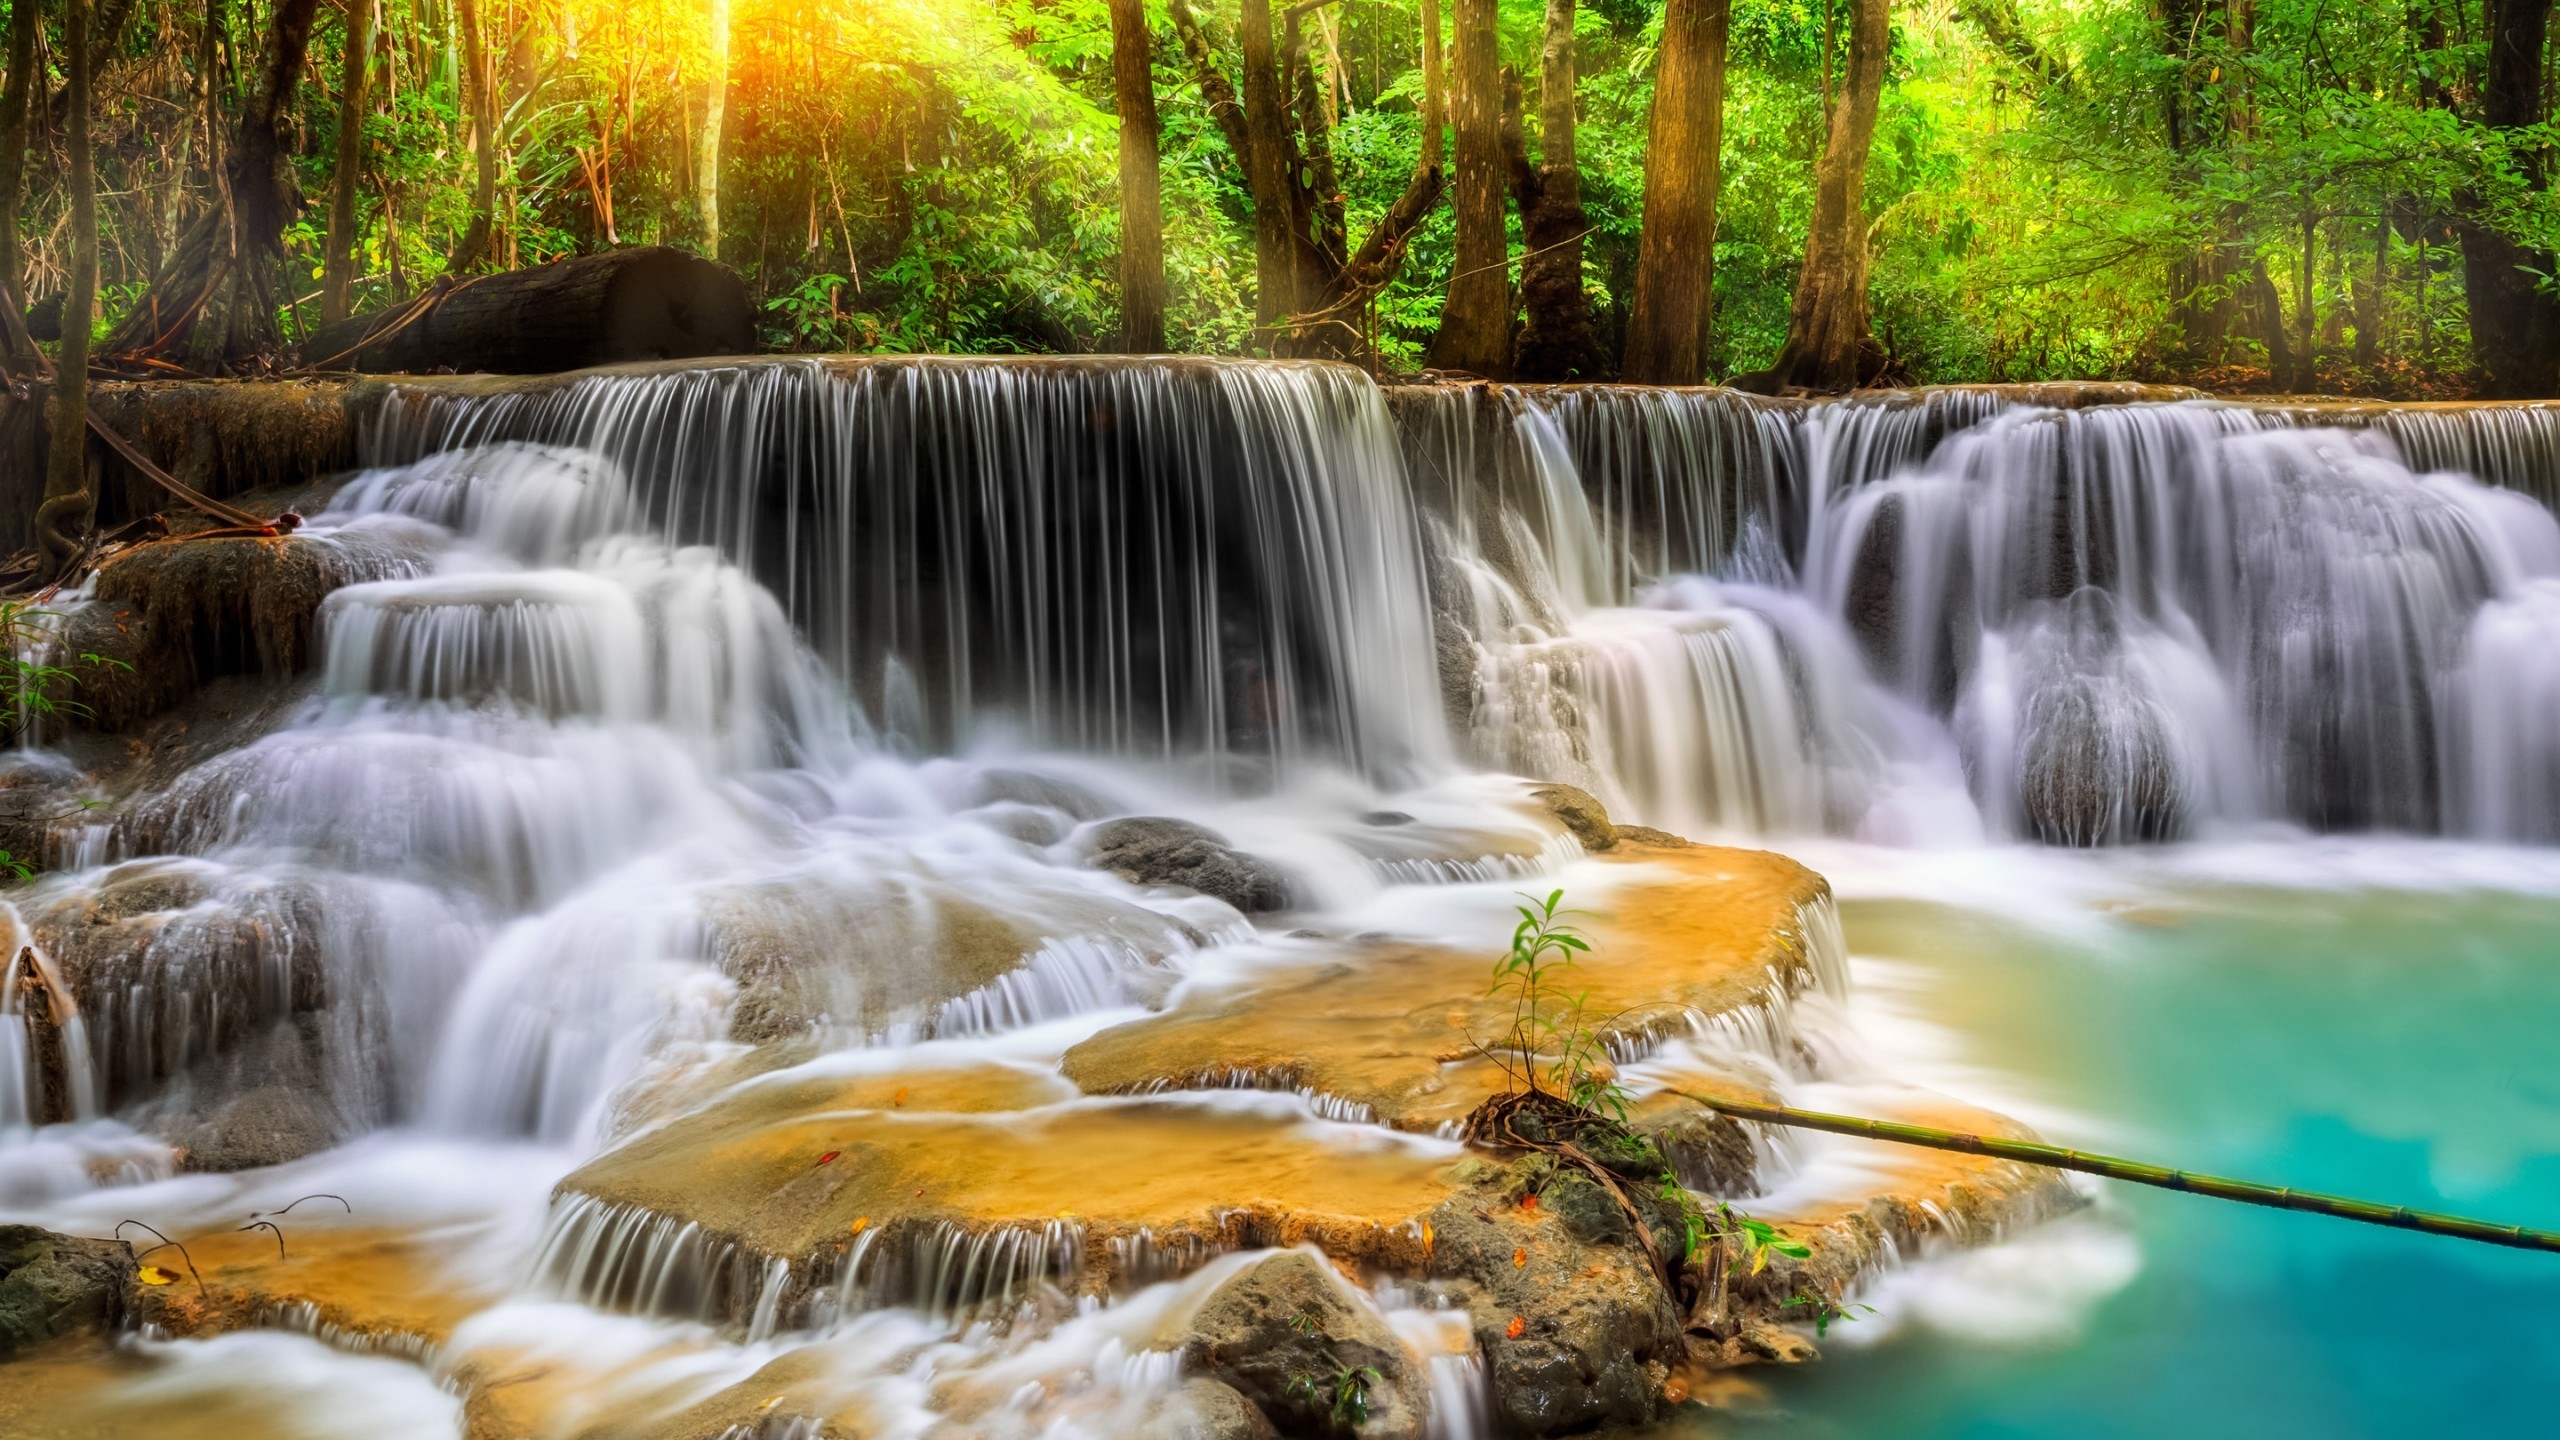 Waterfall in Thailand for 2560x1440 HDTV resolution